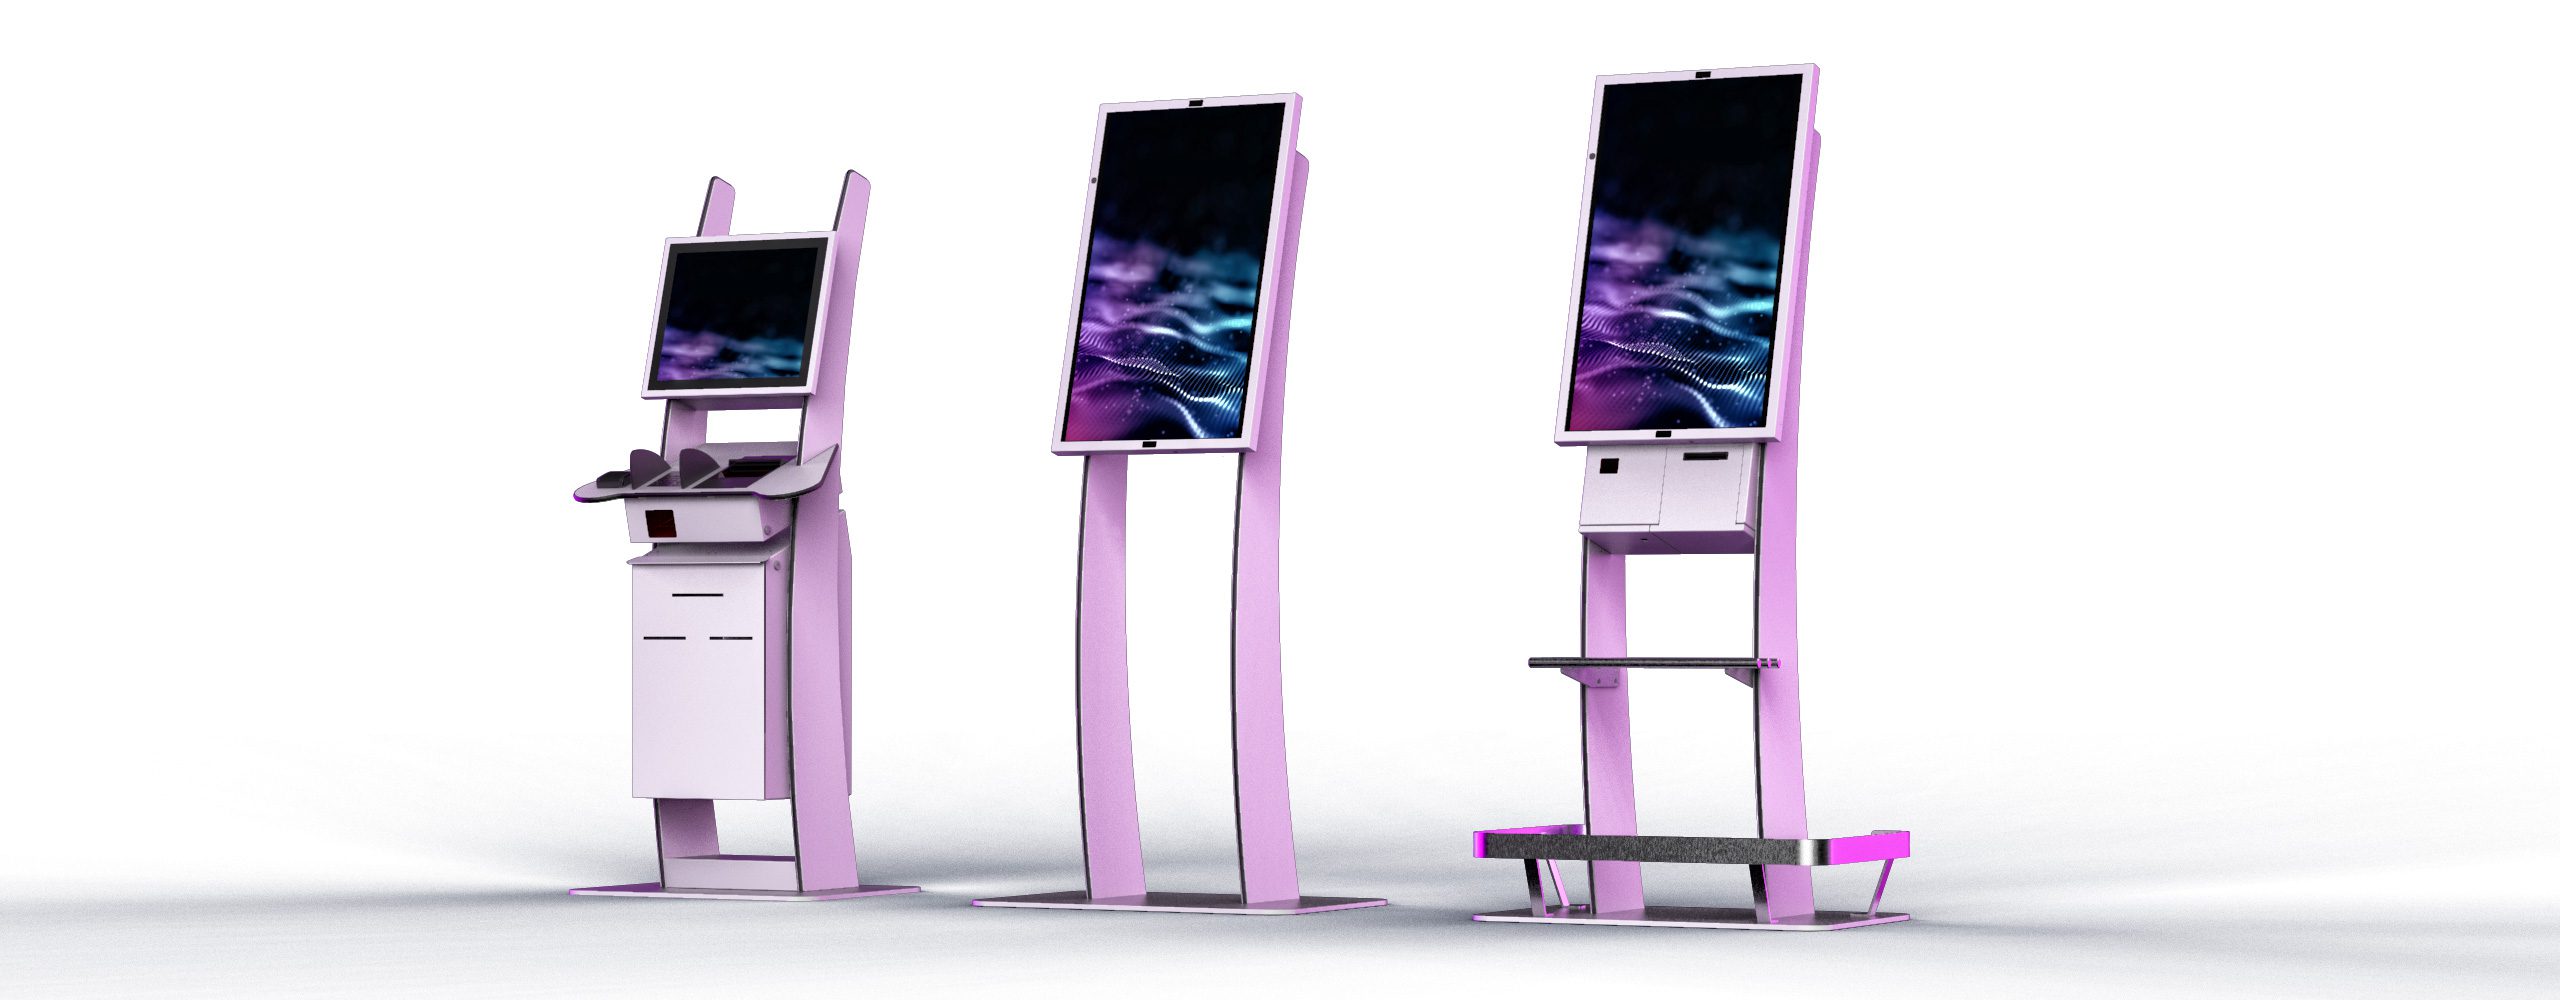 12-small-format-kiosk-capacitive-touch-pc